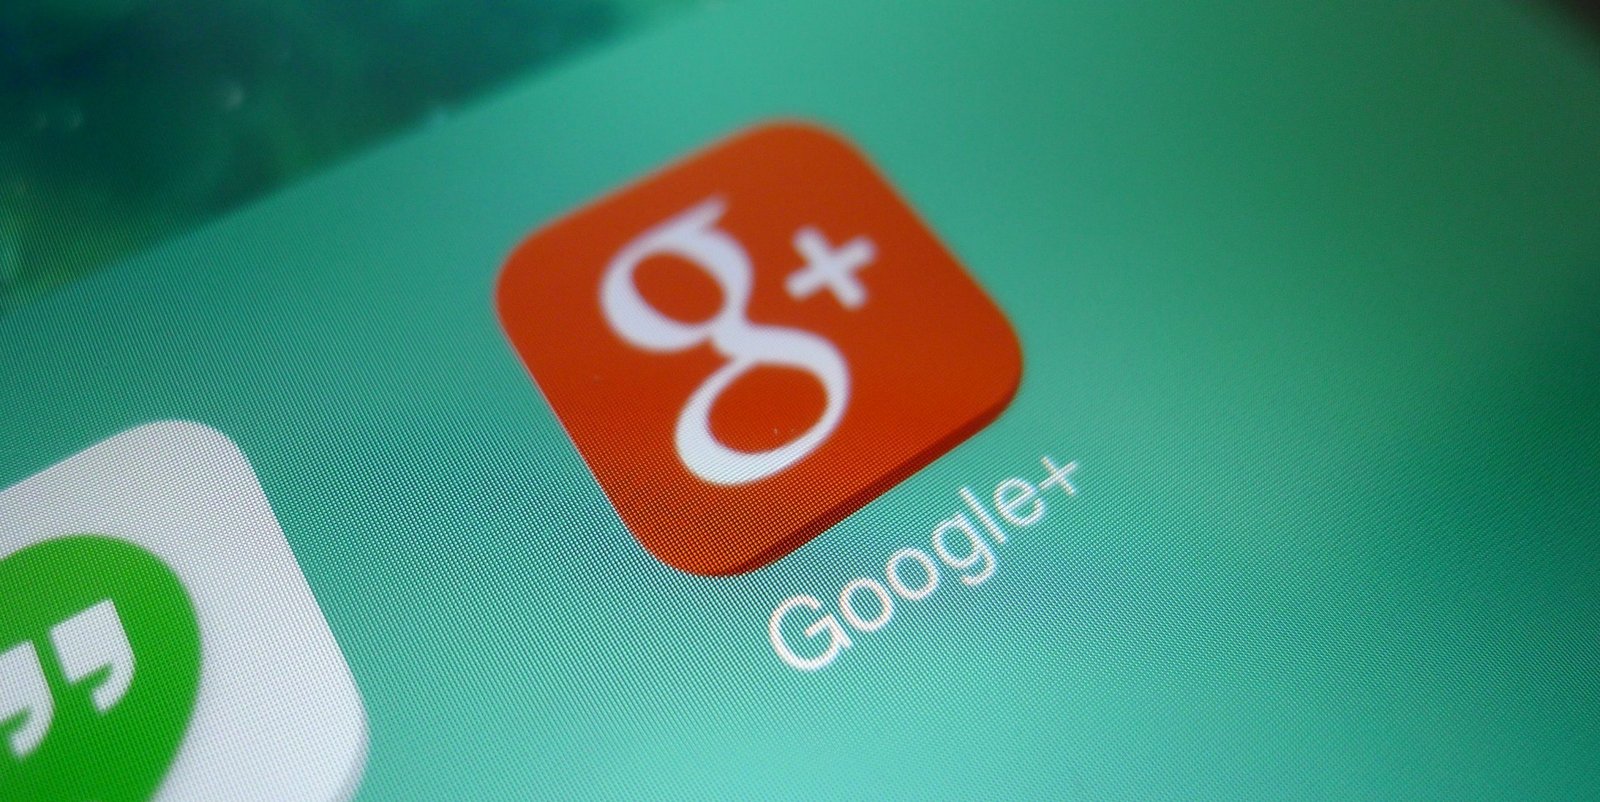 Demise of Google+ begins, profile links disabled from Google homepage